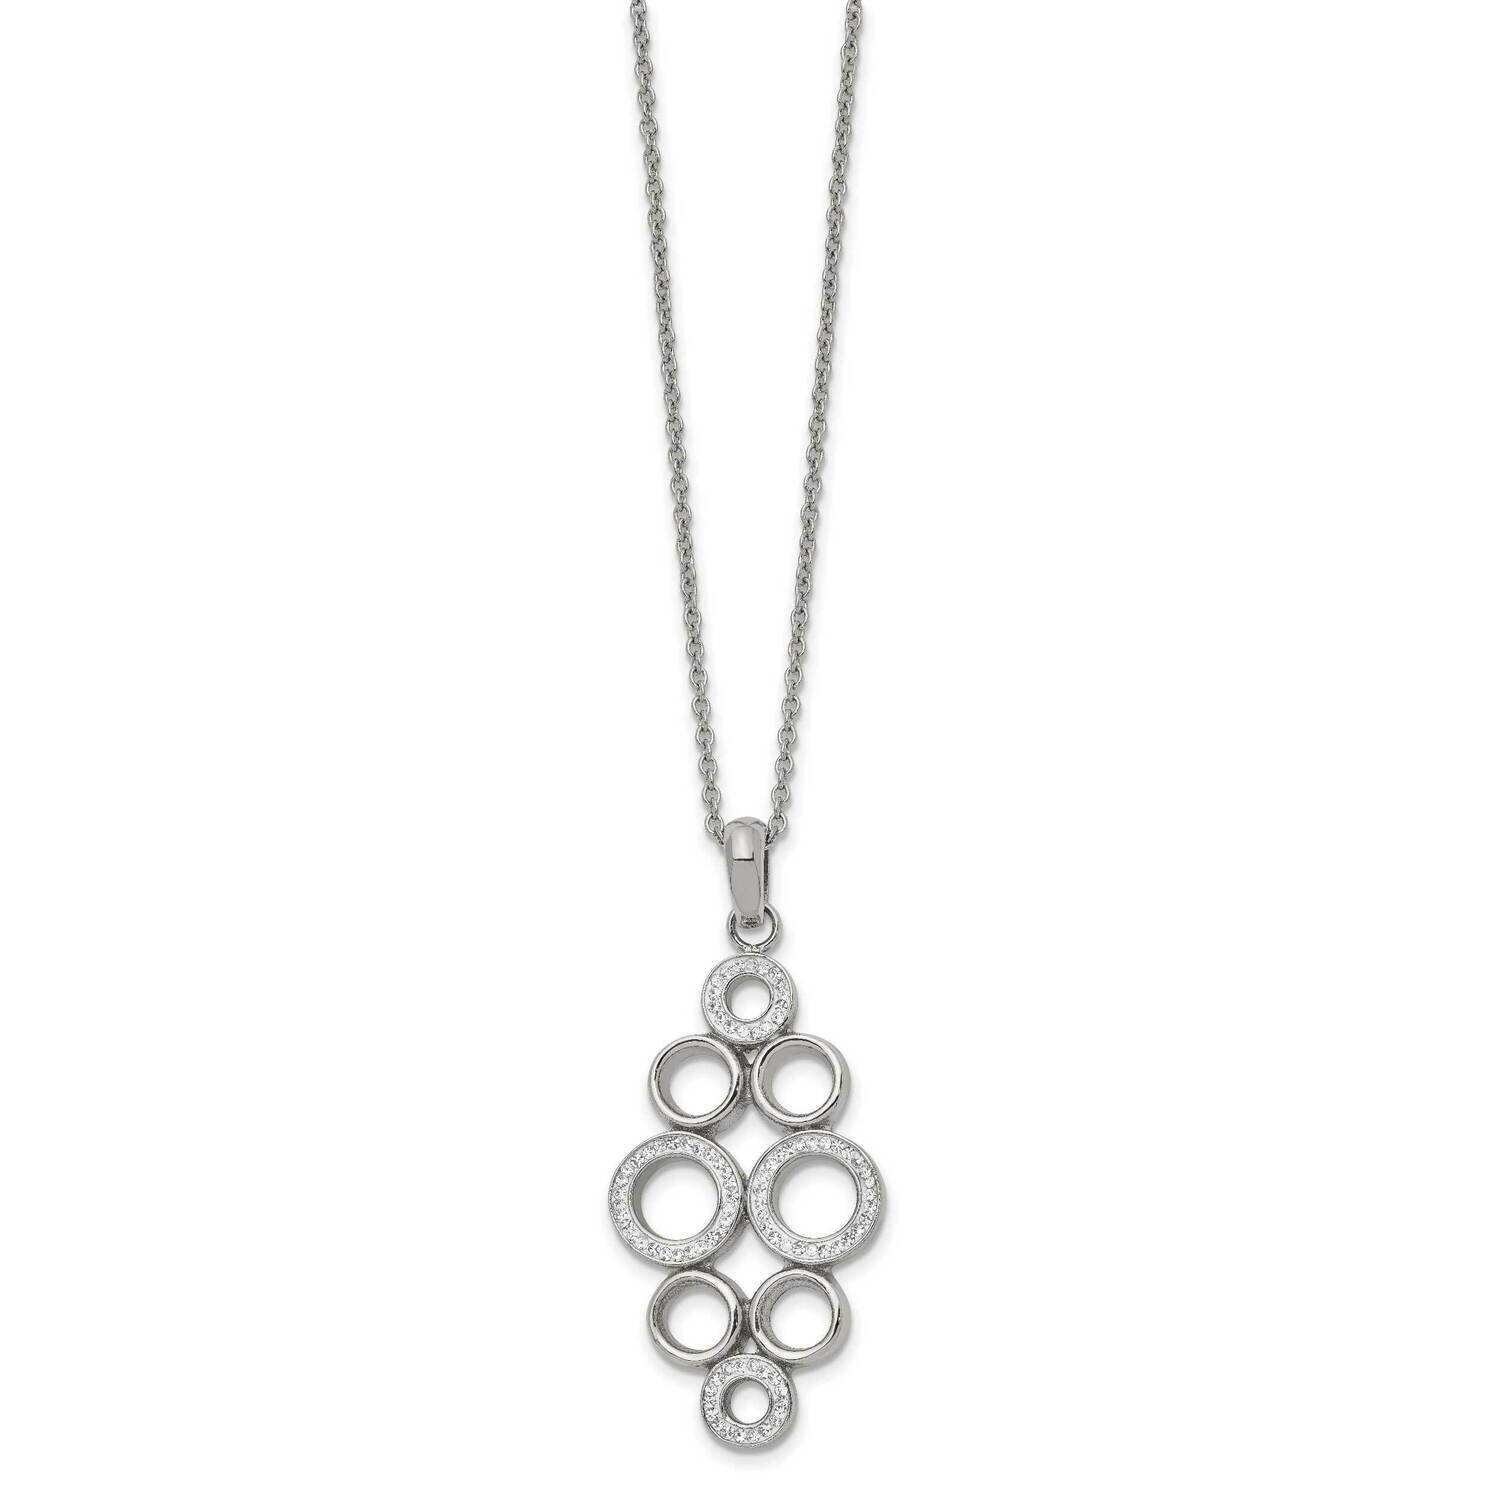 Preciosa Crystal Circle 16 Inch 2 Inch Ext. Necklace Stainless Steel Polished SRN2738-16